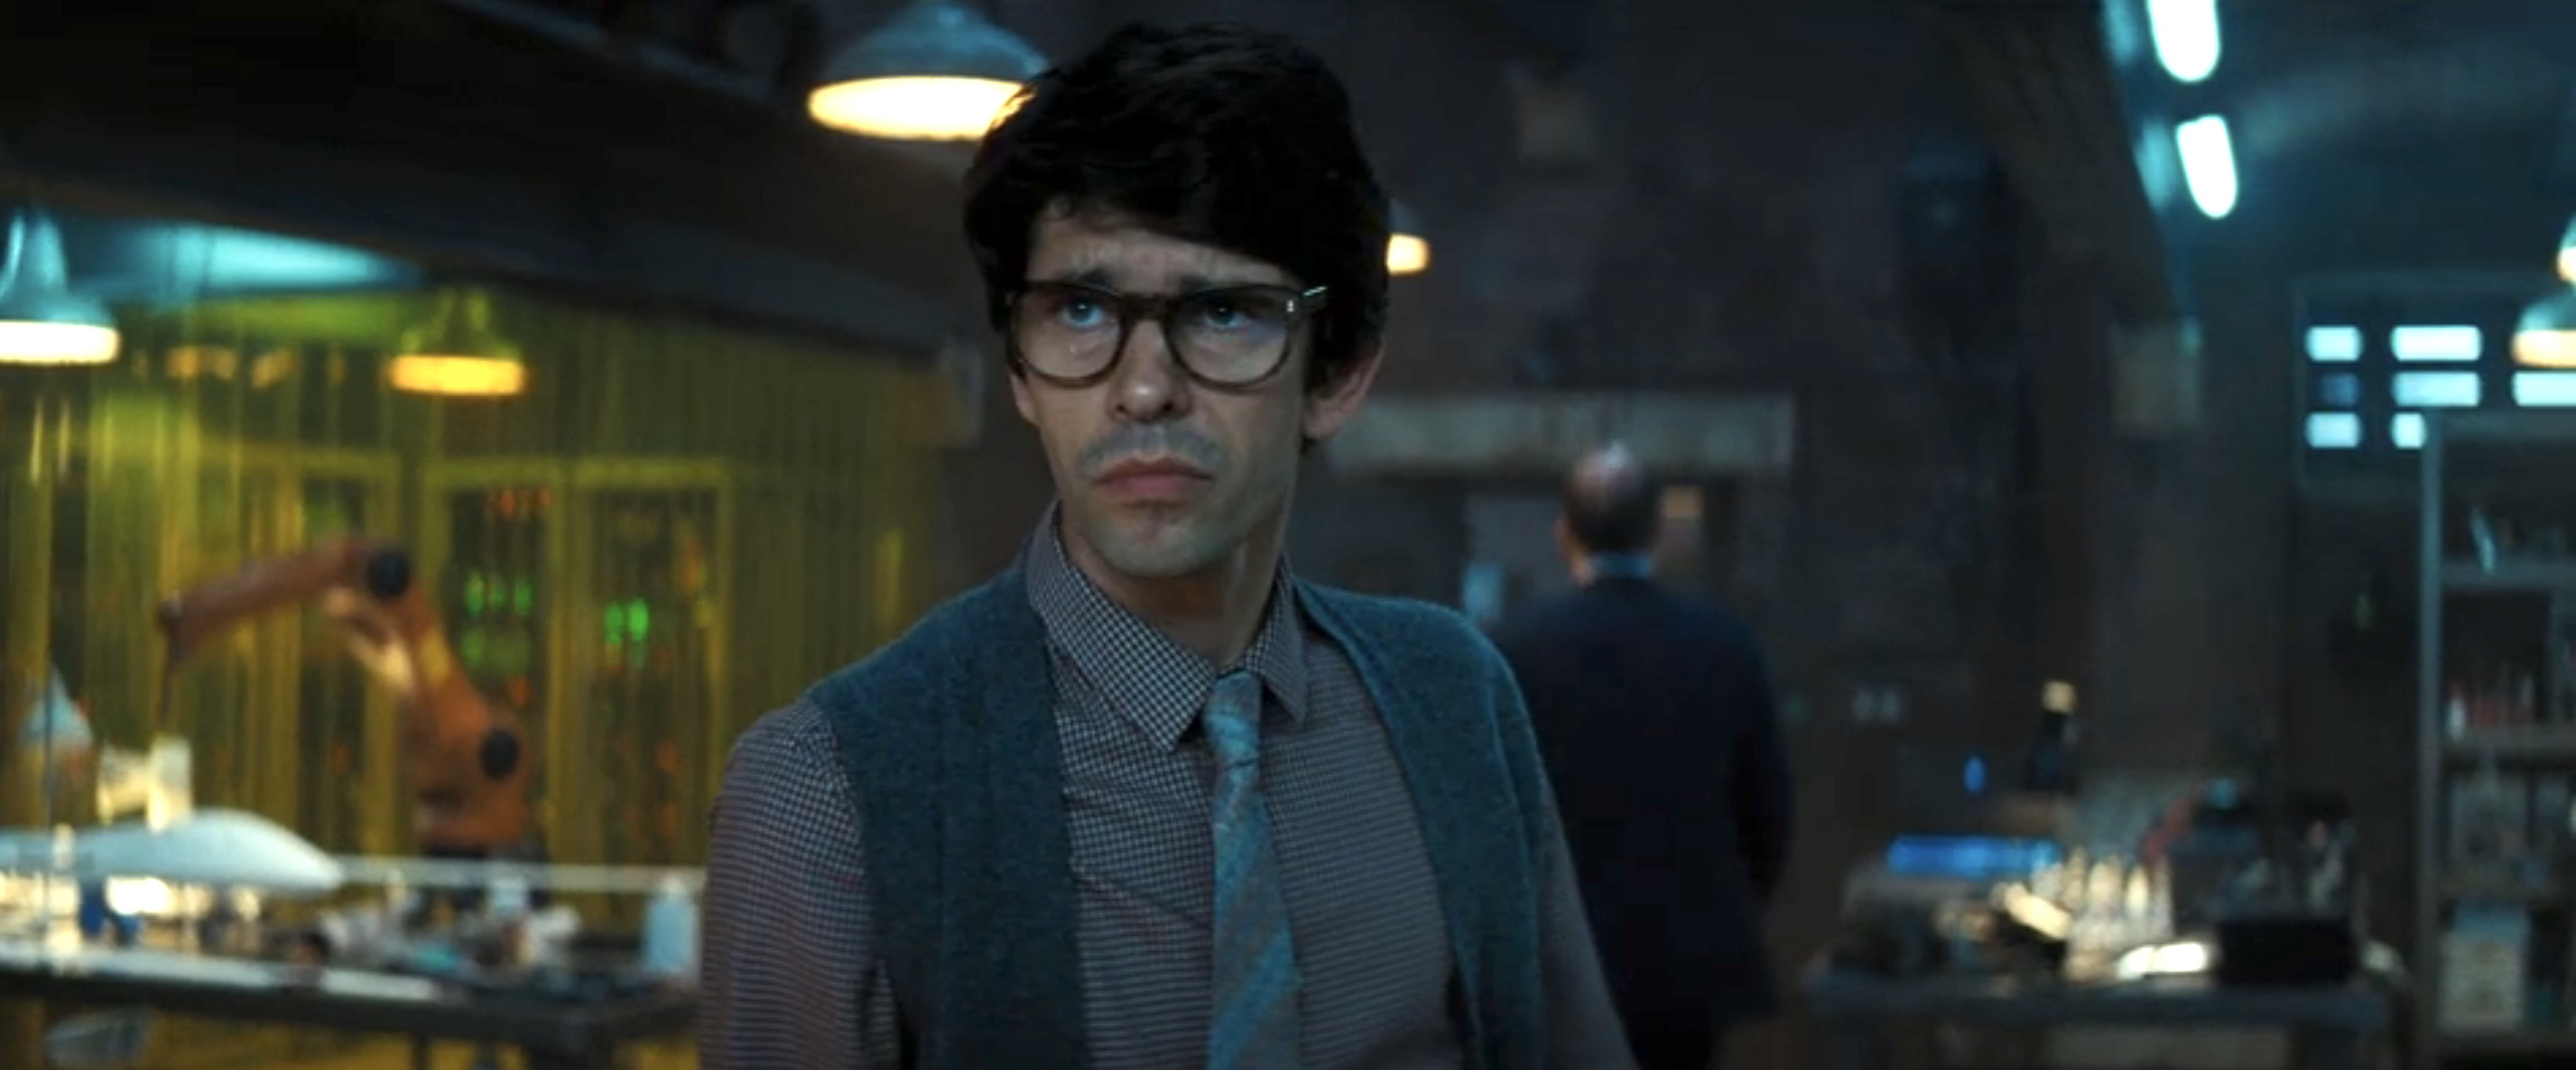 No Time to Die Cast - Ben Whishaw as Q